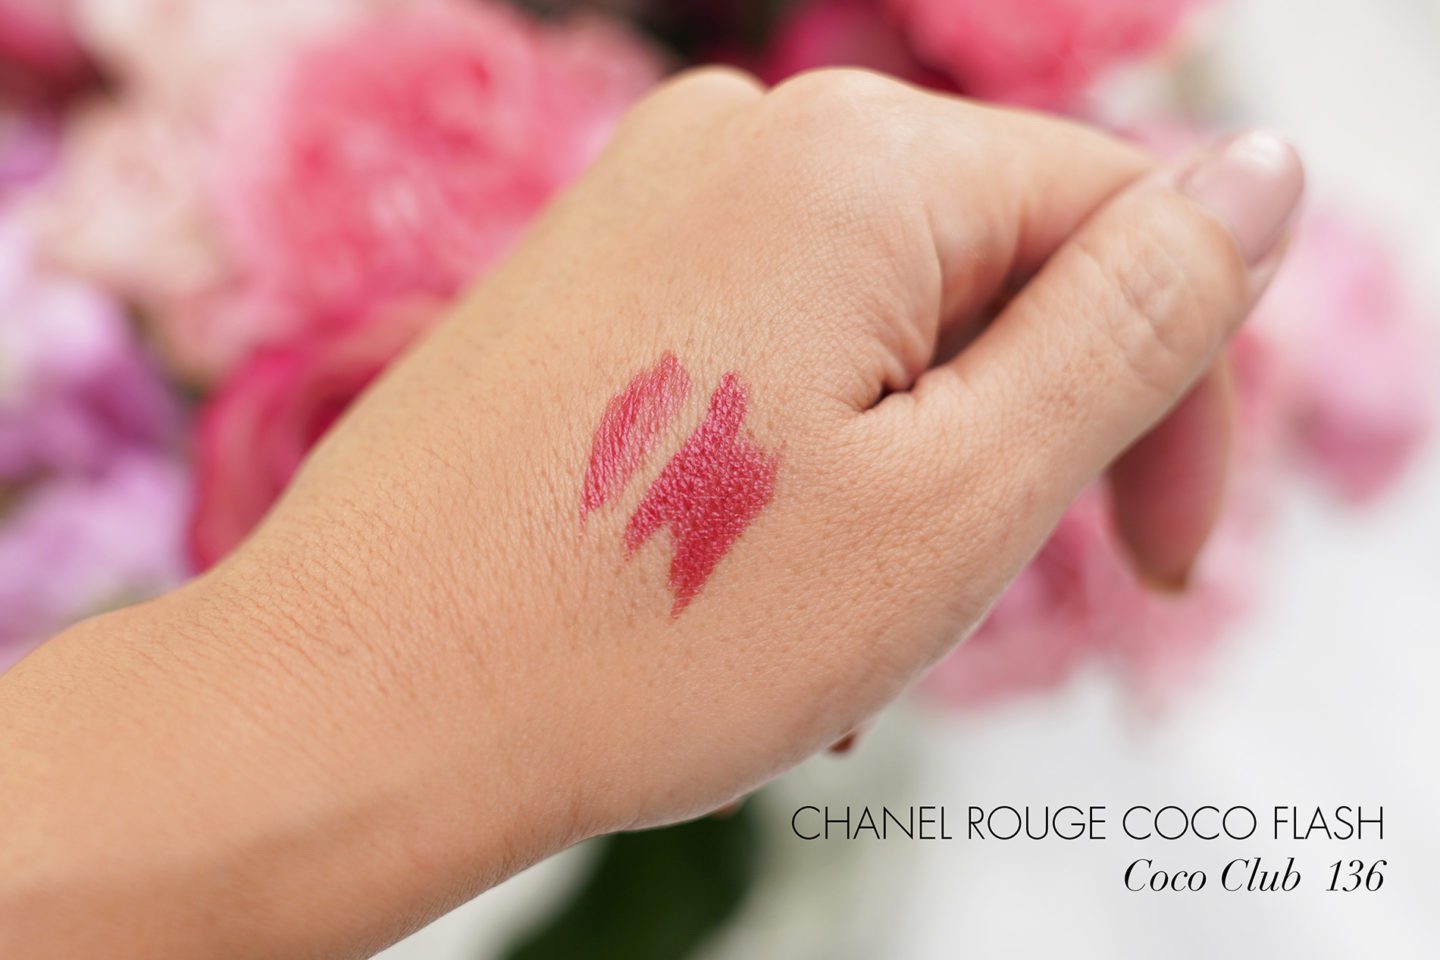 Chanel Black Friday 2020 Rouge Coco Flash in Coco Club swatches | The Beauty Lookbook